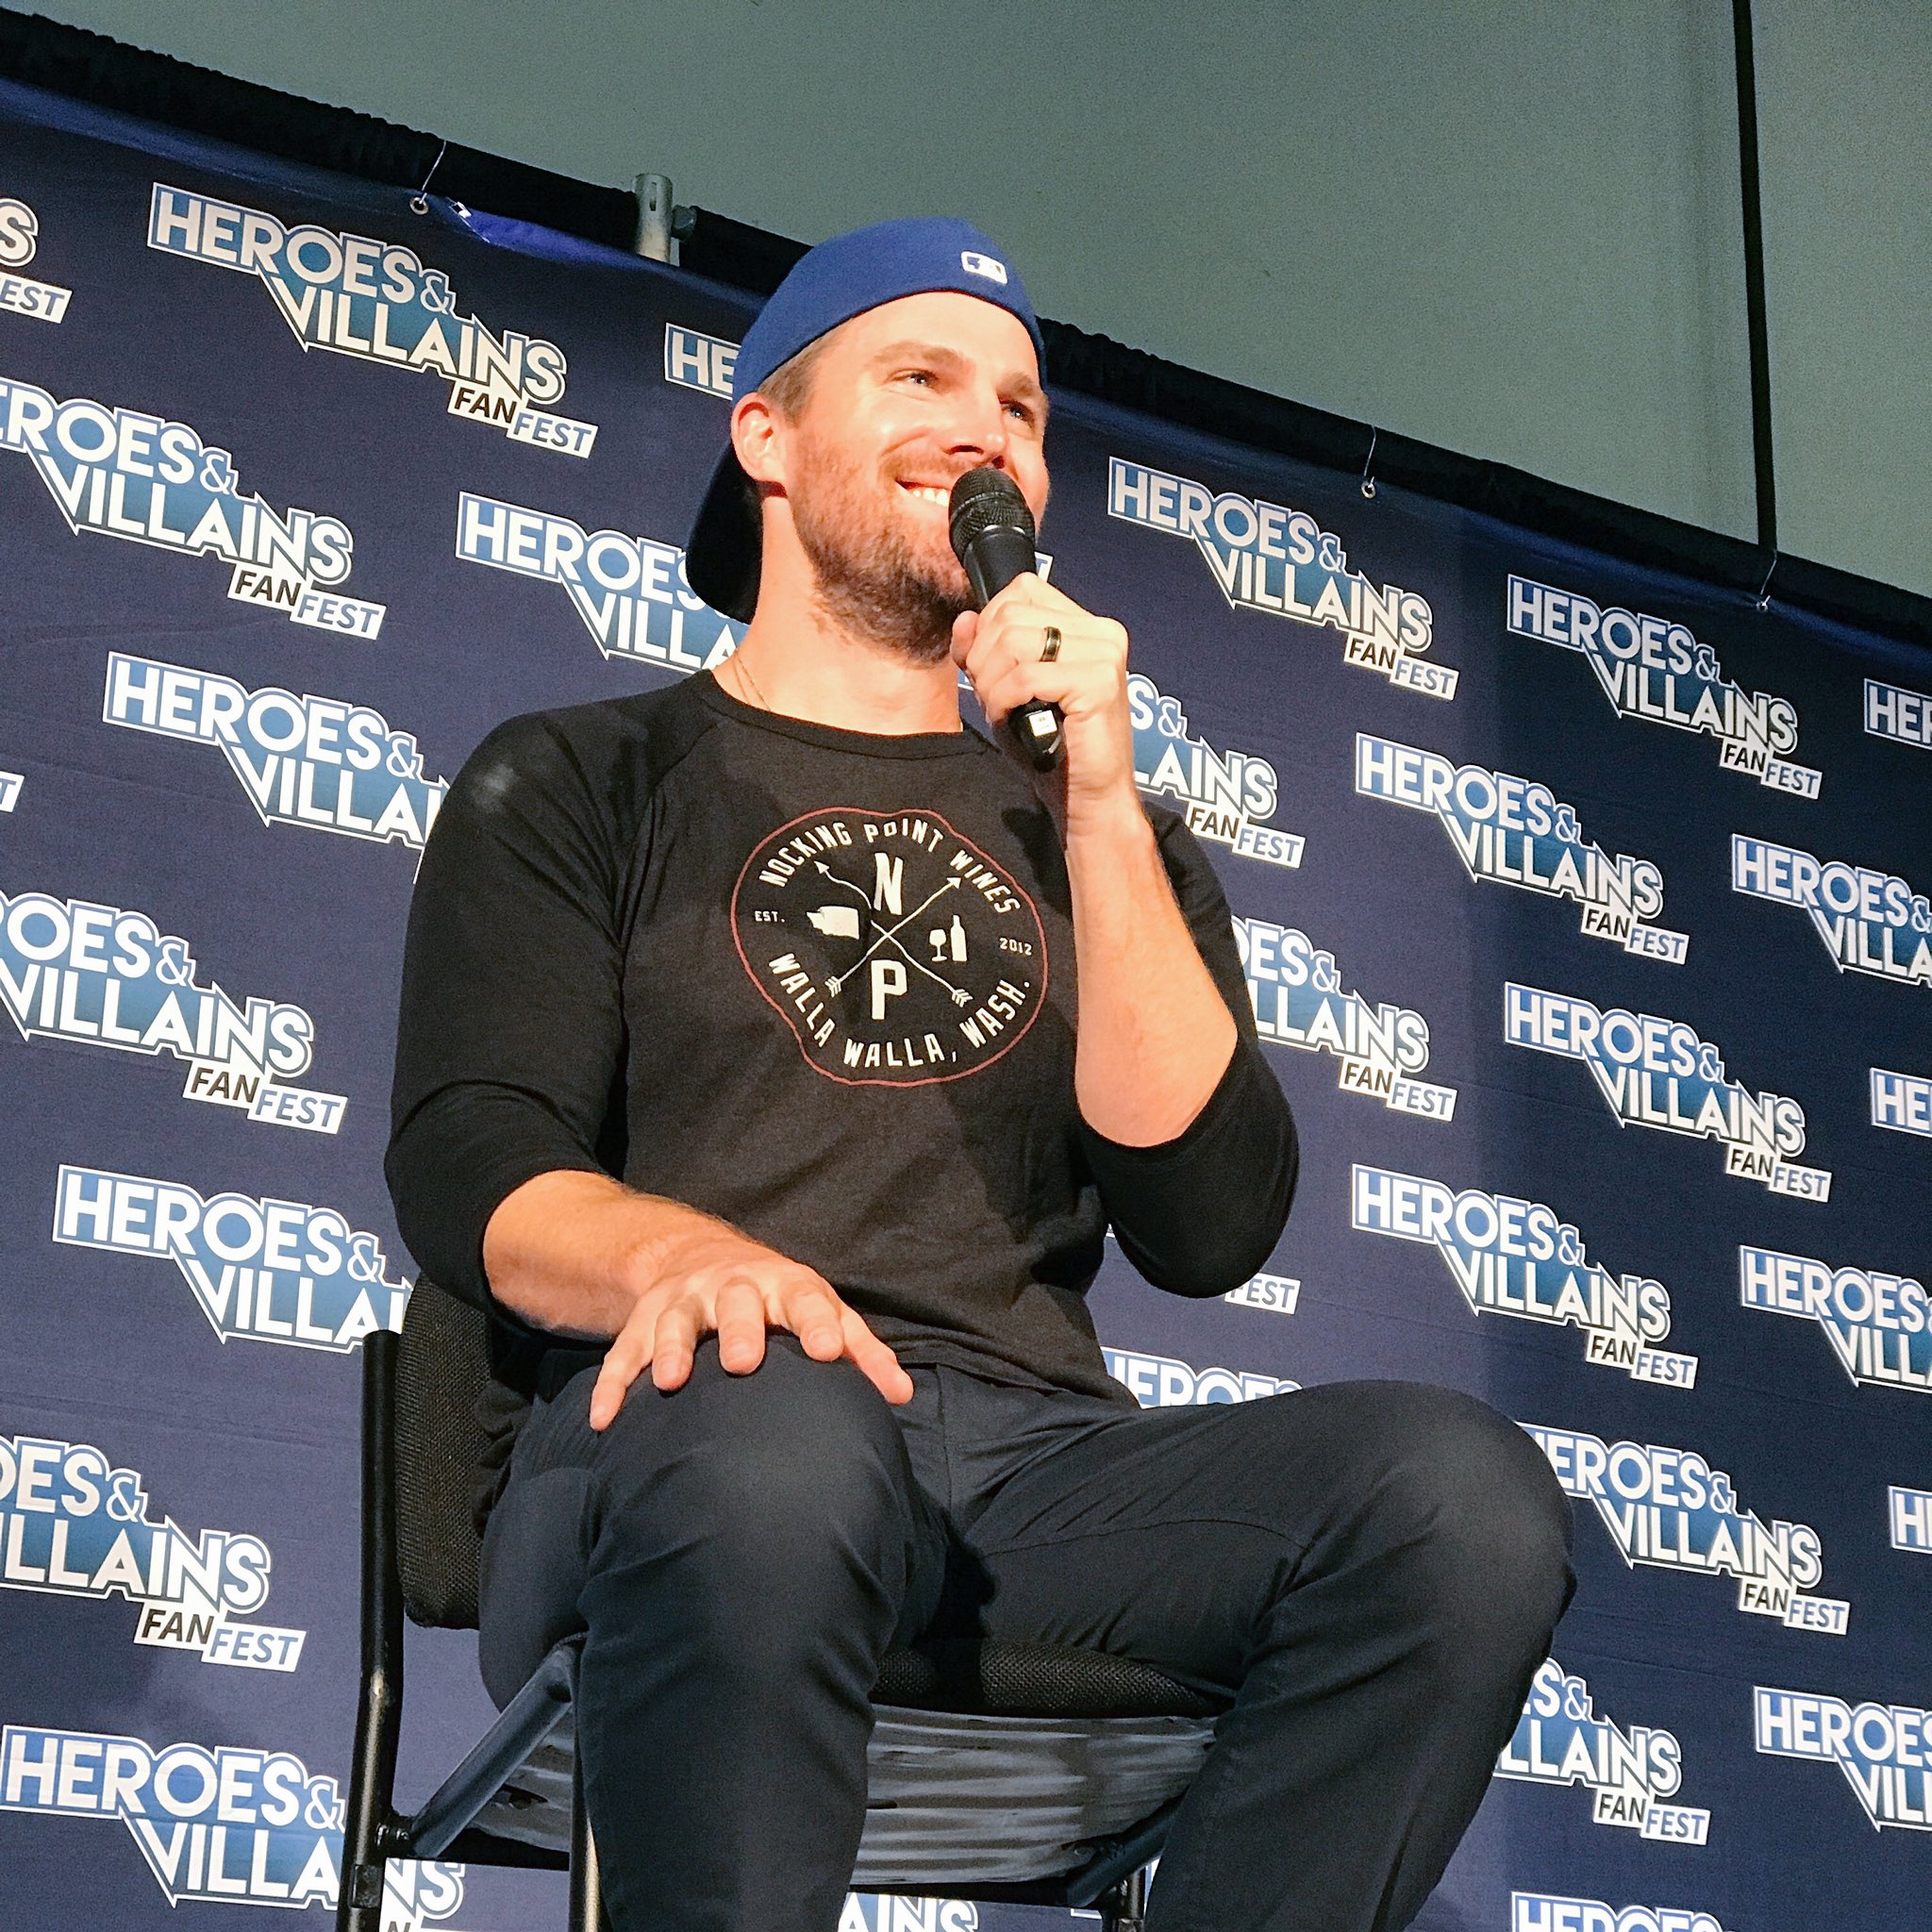 Stephen Amell Heroes and Villains